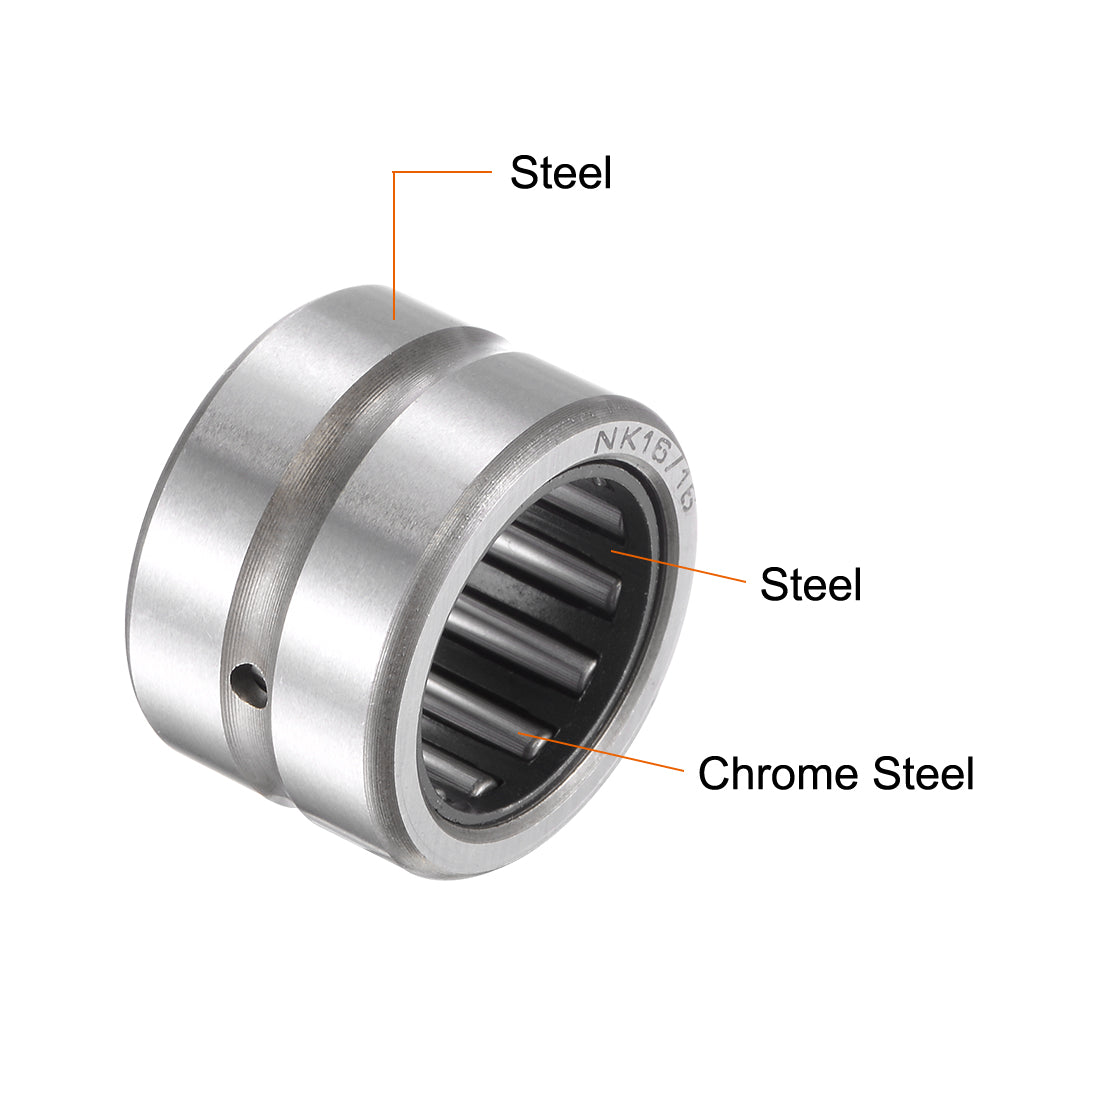 uxcell Uxcell NK16/16 Needle Roller Bearings 16mm x 24mm x 16mm Chrome Steel Open End 2pcs